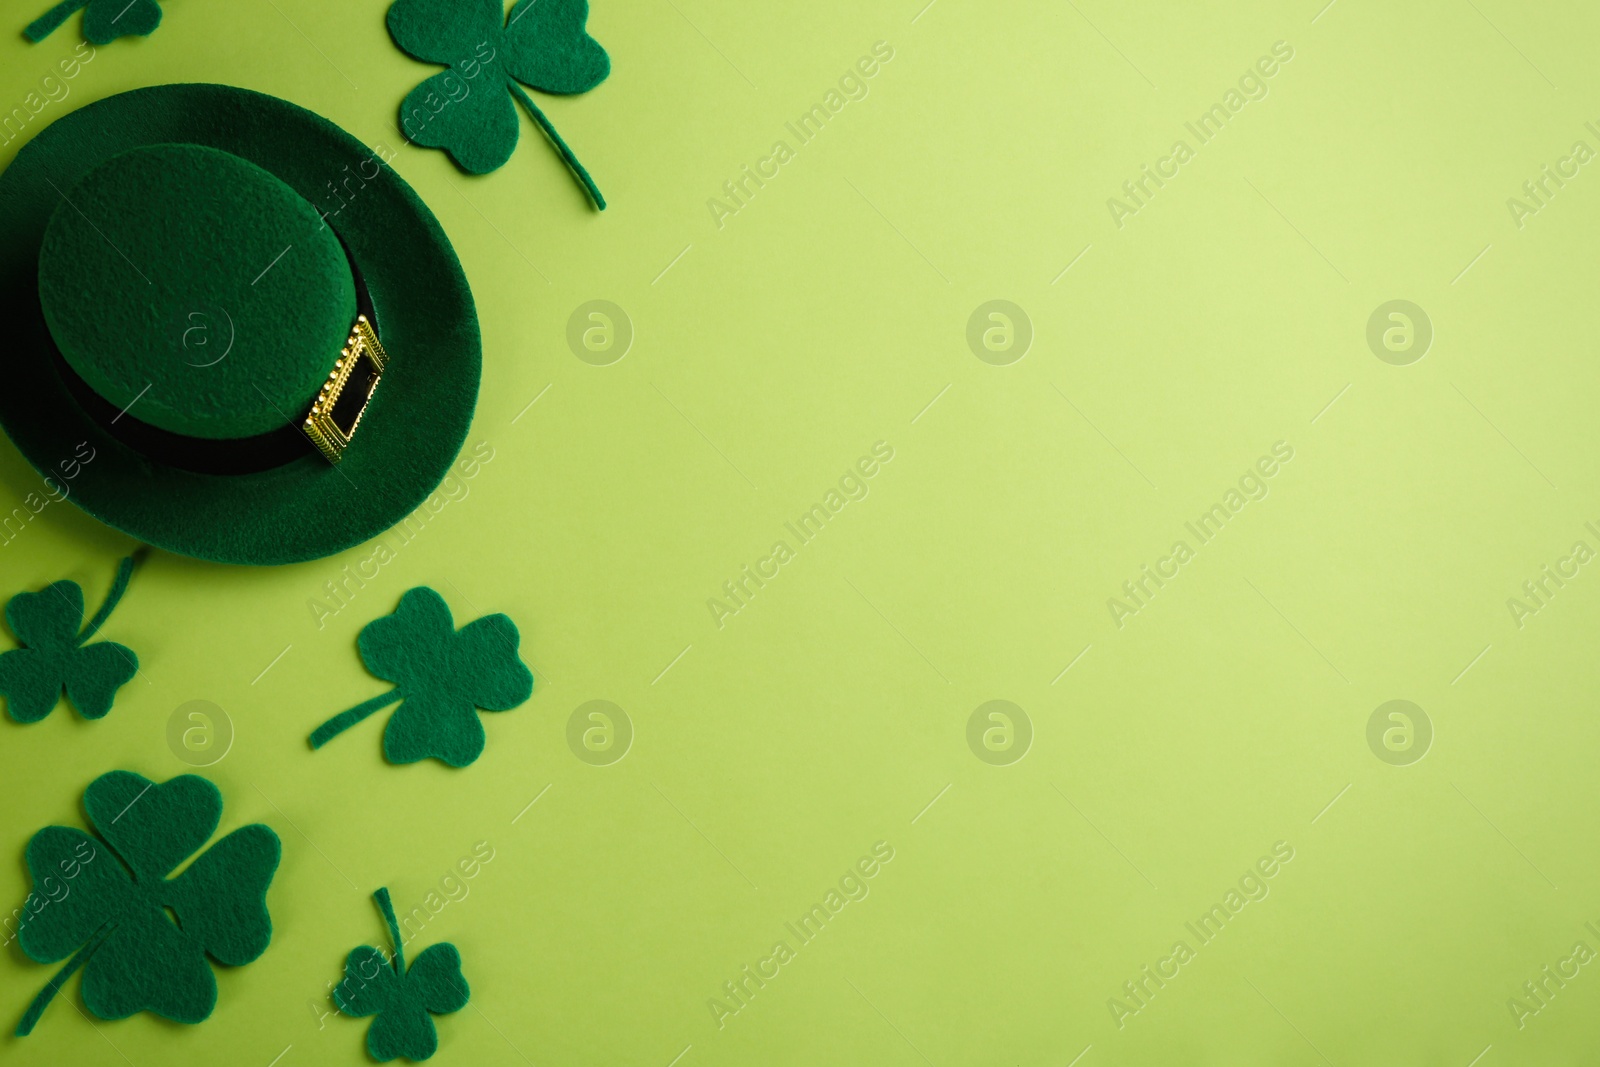 Photo of Leprechaun's hat and decorative clover leaves on green background, flat lay with space for text. St. Patrick's day celebration